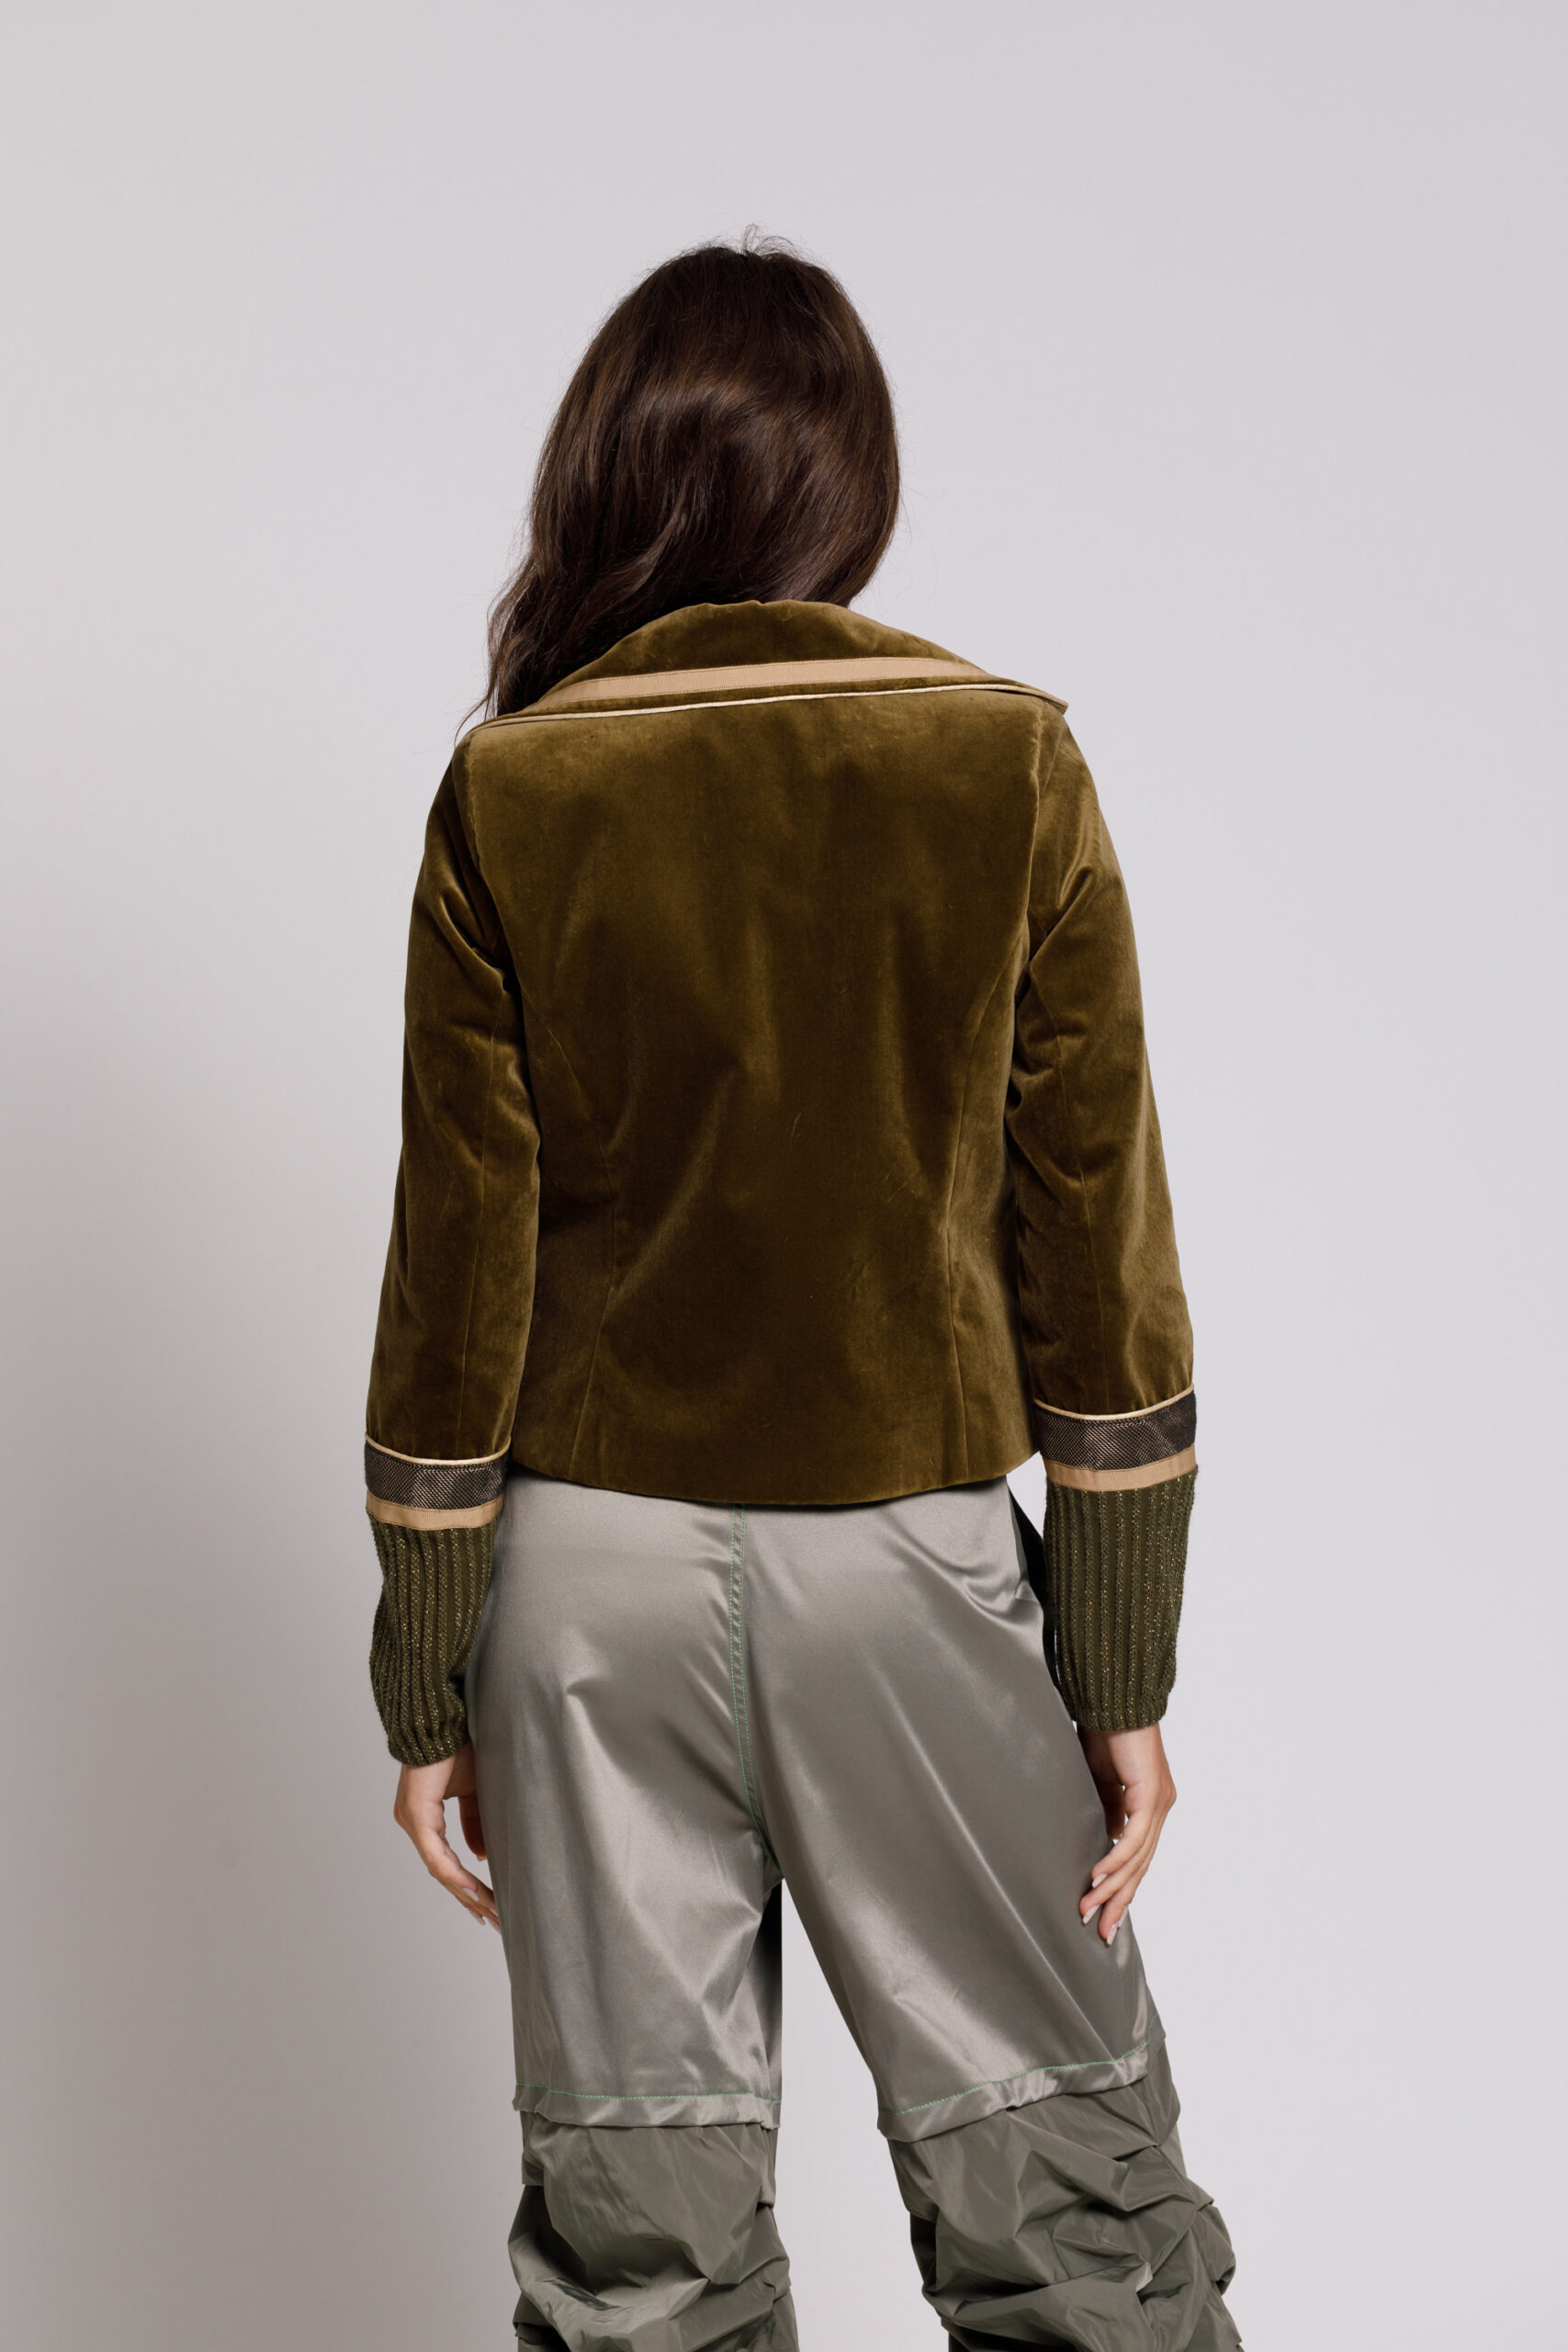 DAVIN casual jacket in olive velvet and knit cuffs. Natural fabrics, original design, handmade embroidery